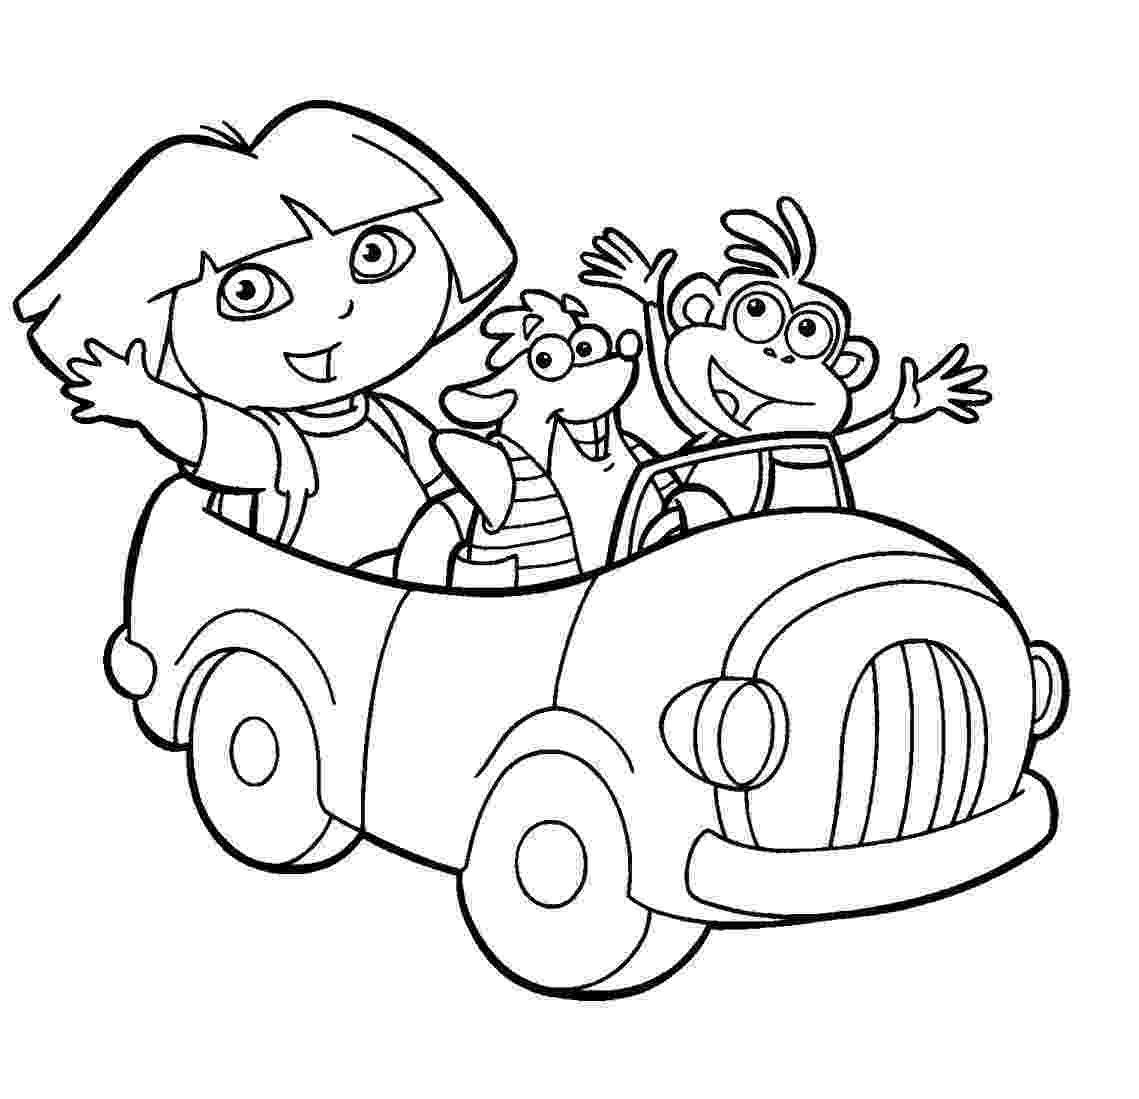 dora colouring page dora coloring pages free printables momjunction page colouring dora 